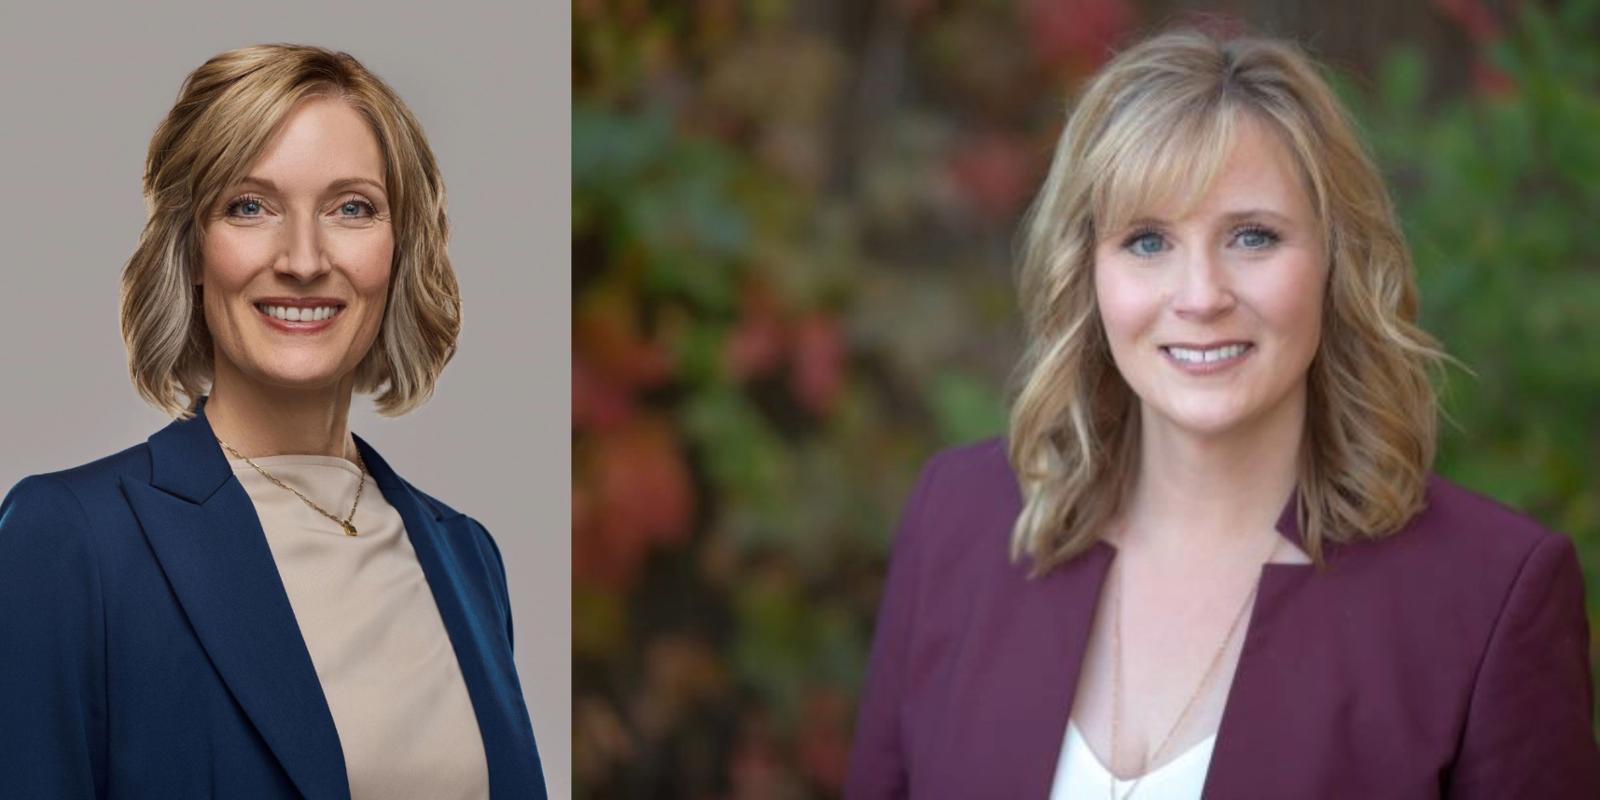 Side by side headshots of two women in professional clothing smiling. 